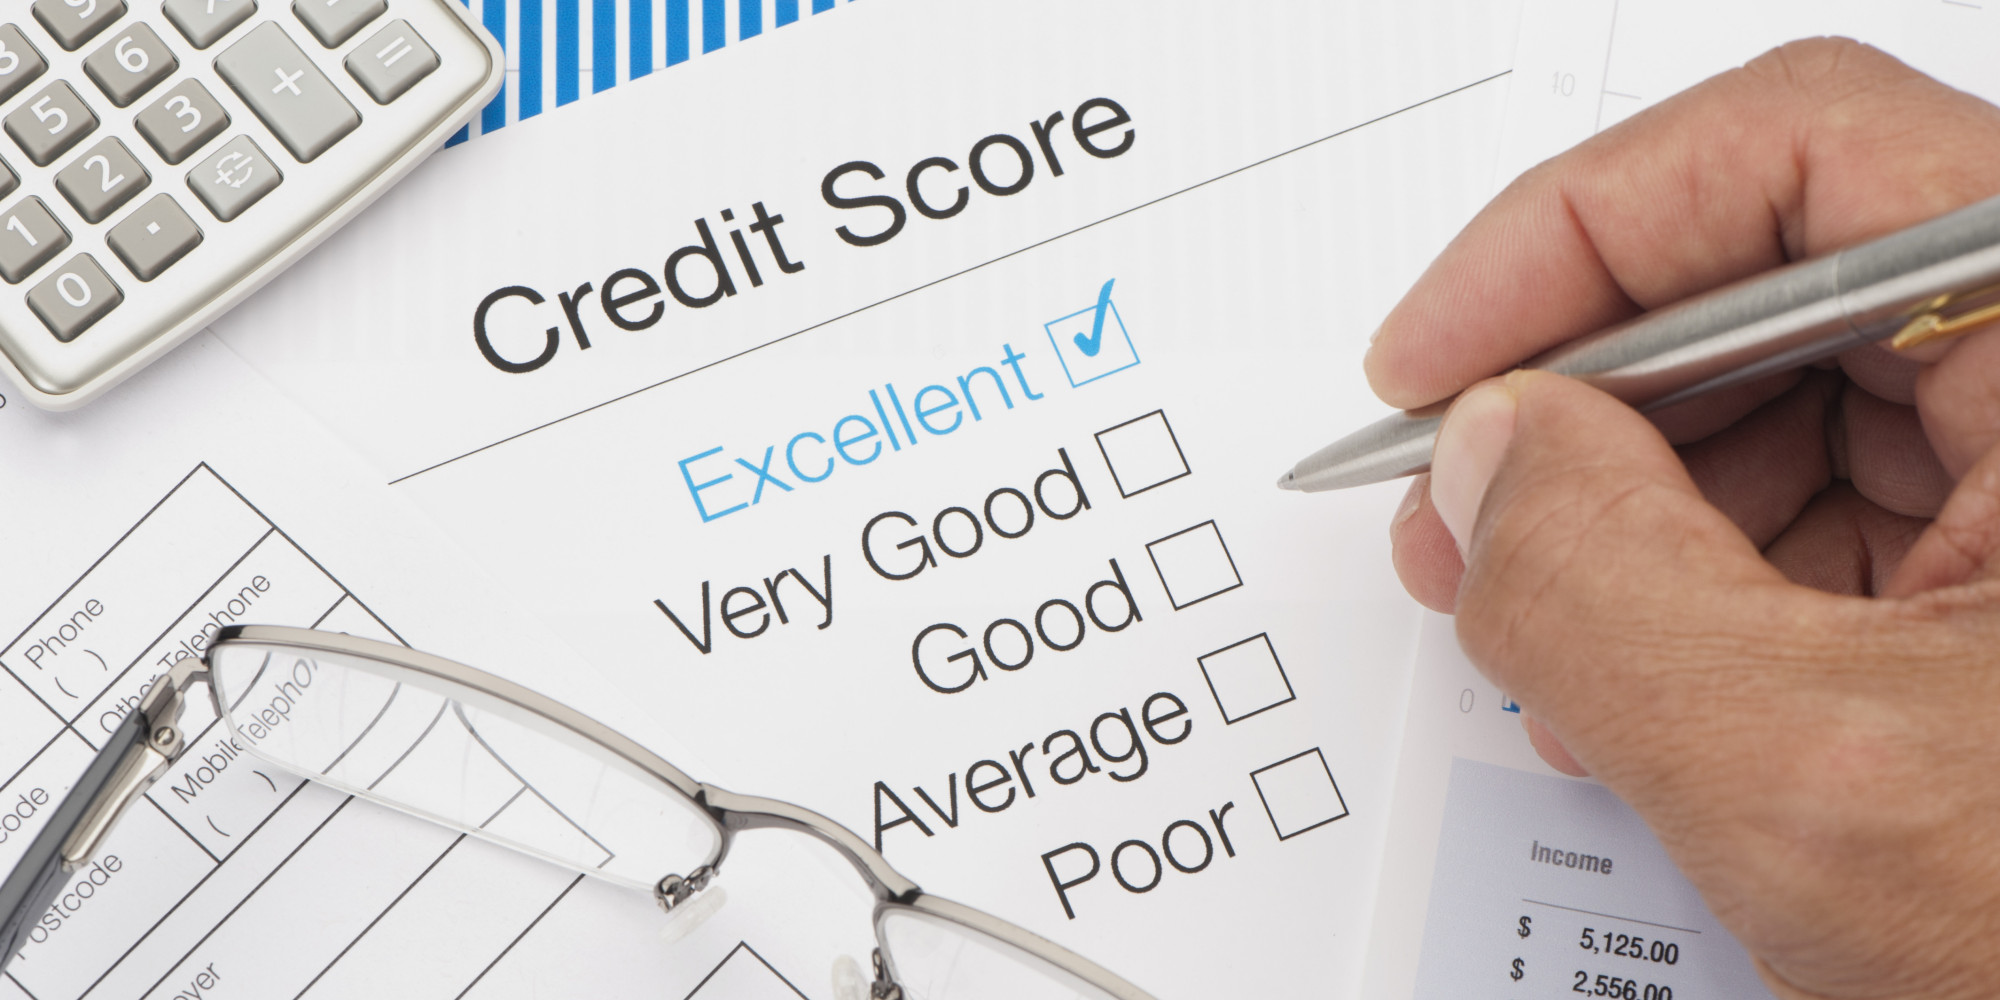 What Credit Score Do You Need to Qualify for a Mortgage?